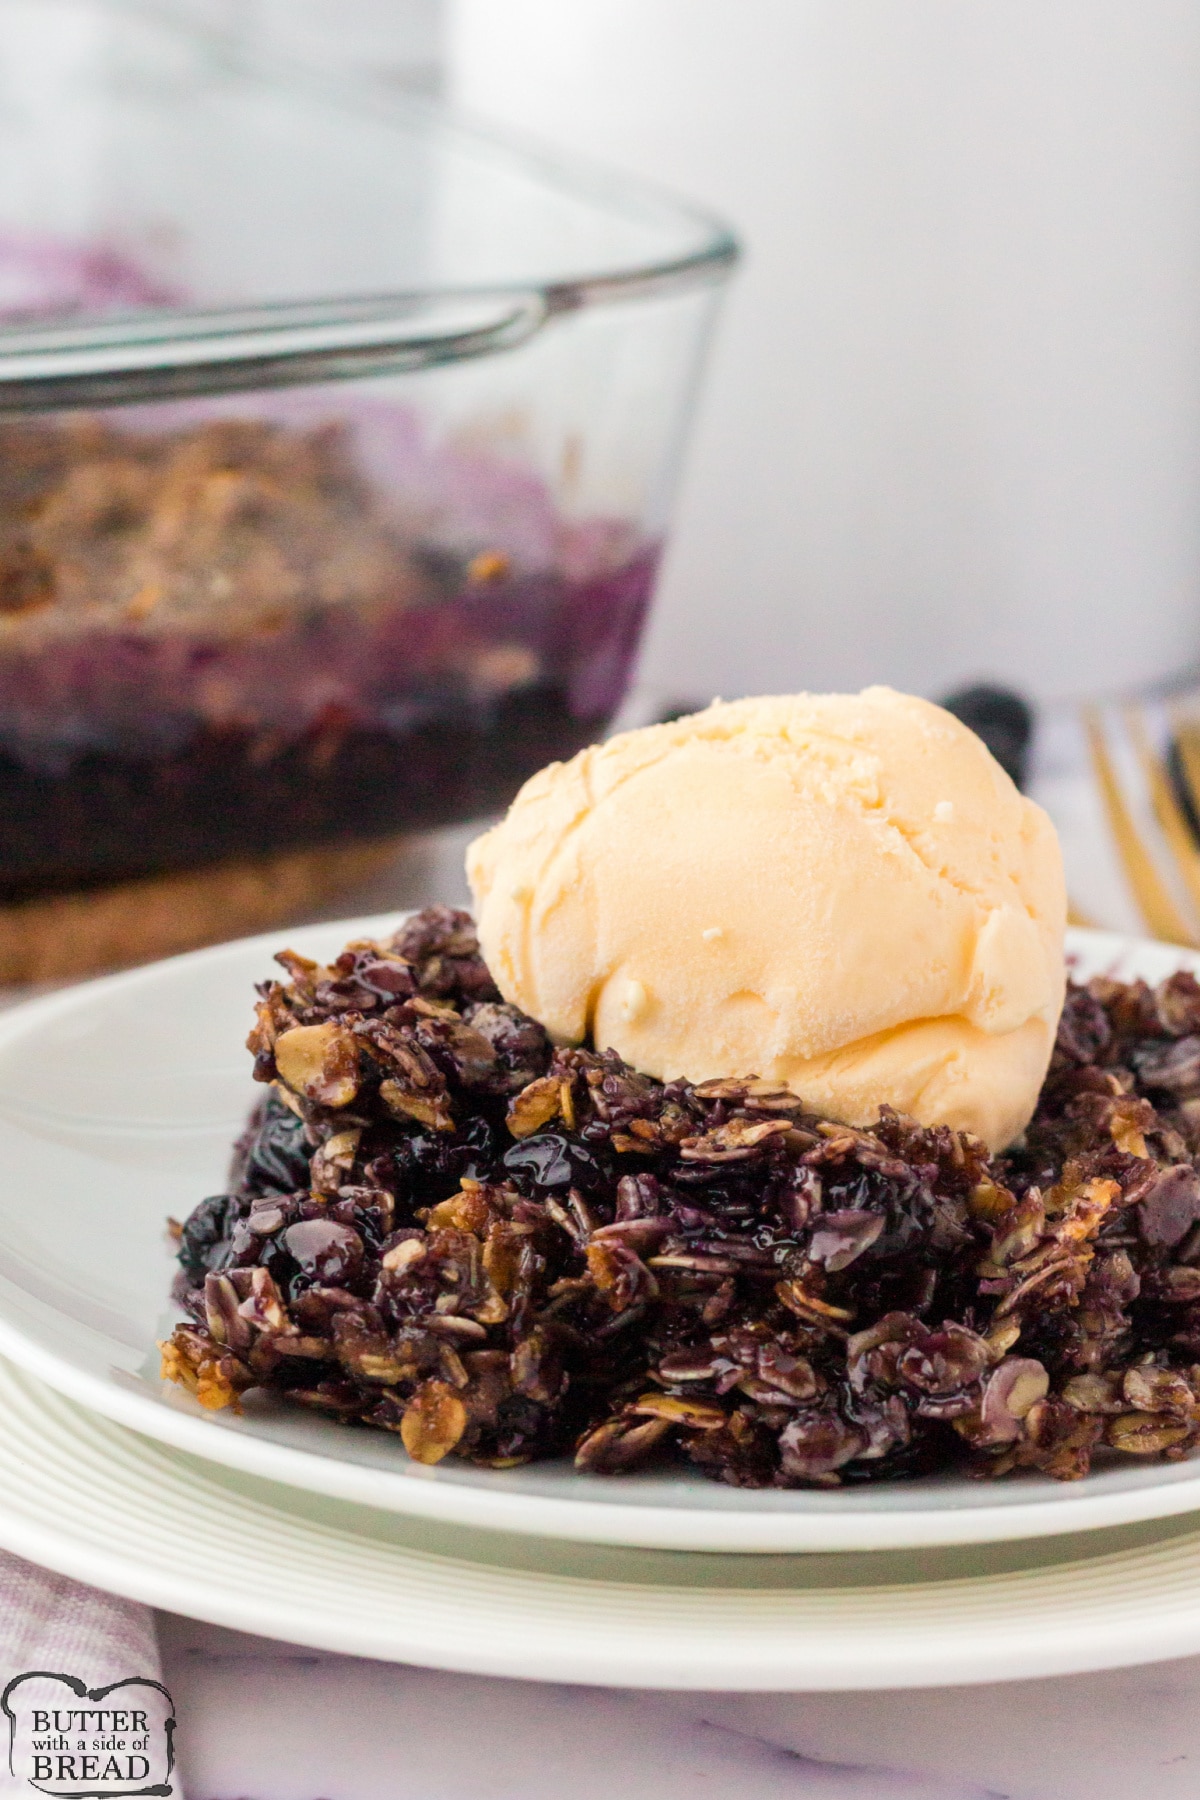 Blueberry crumble with ice cream on top